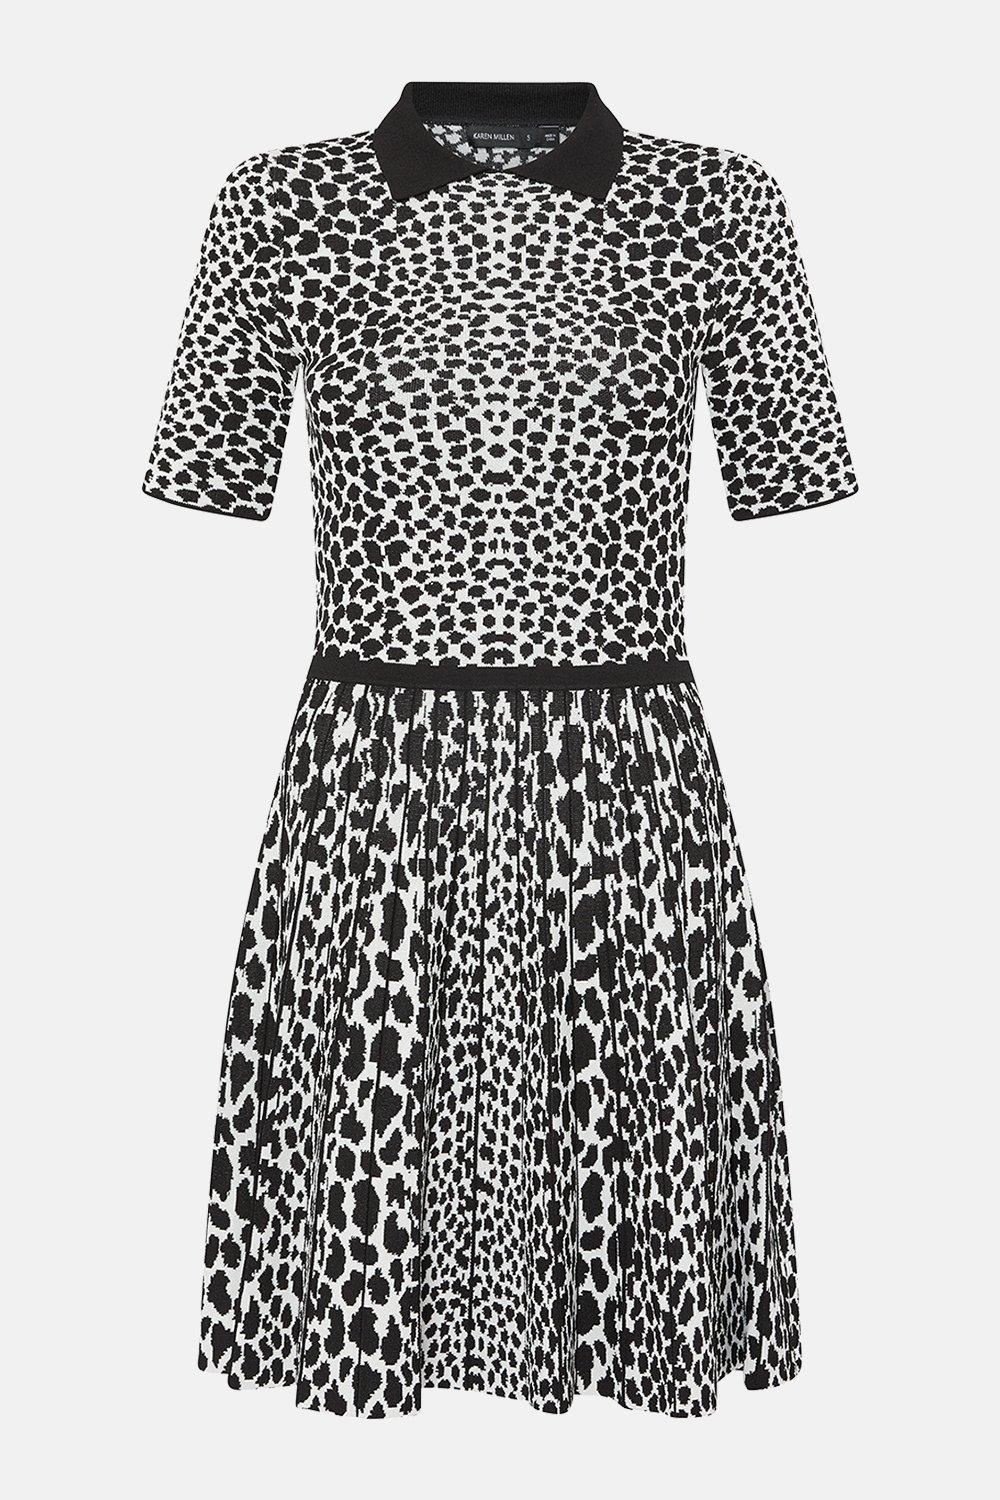 leopard fit and flare dress